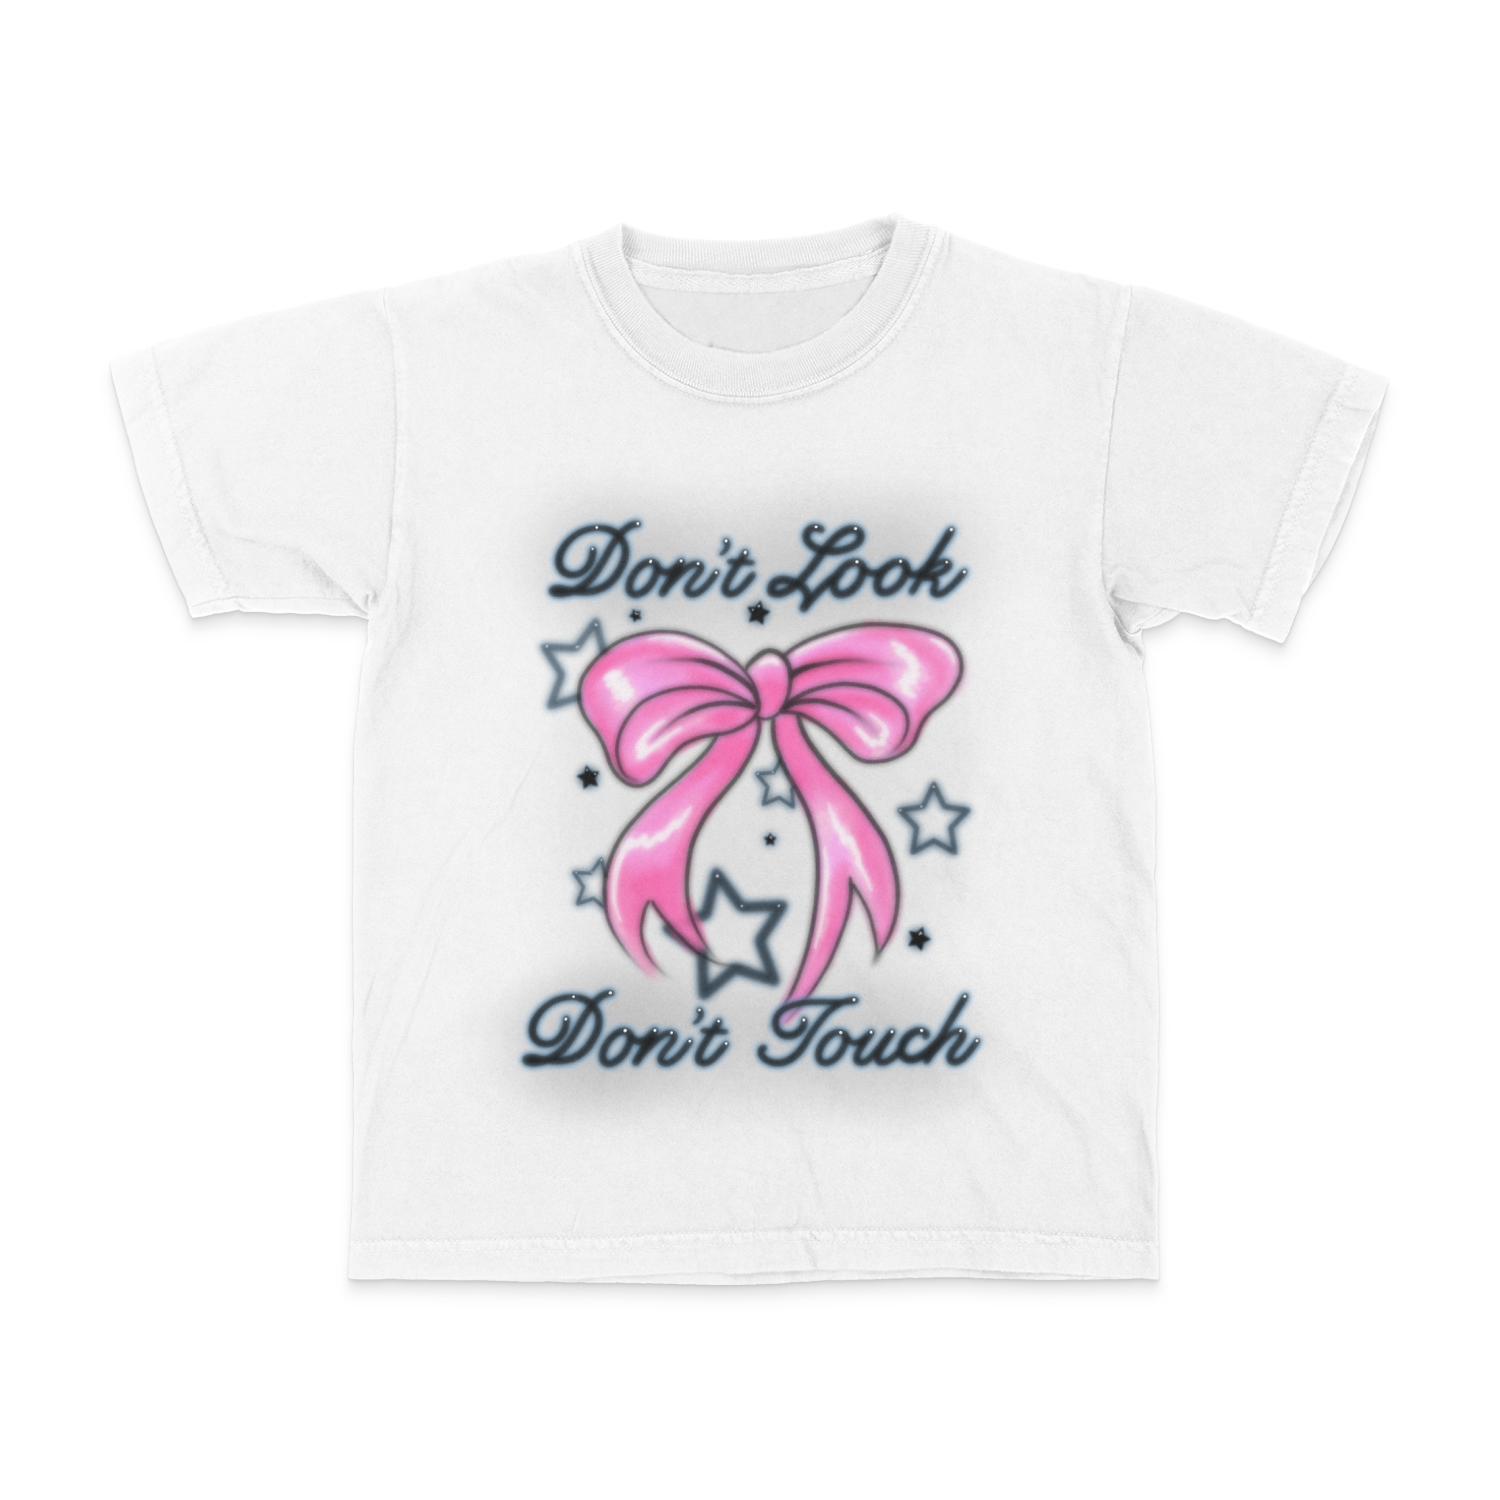 Don't Look, Don't Touch Baby Tee